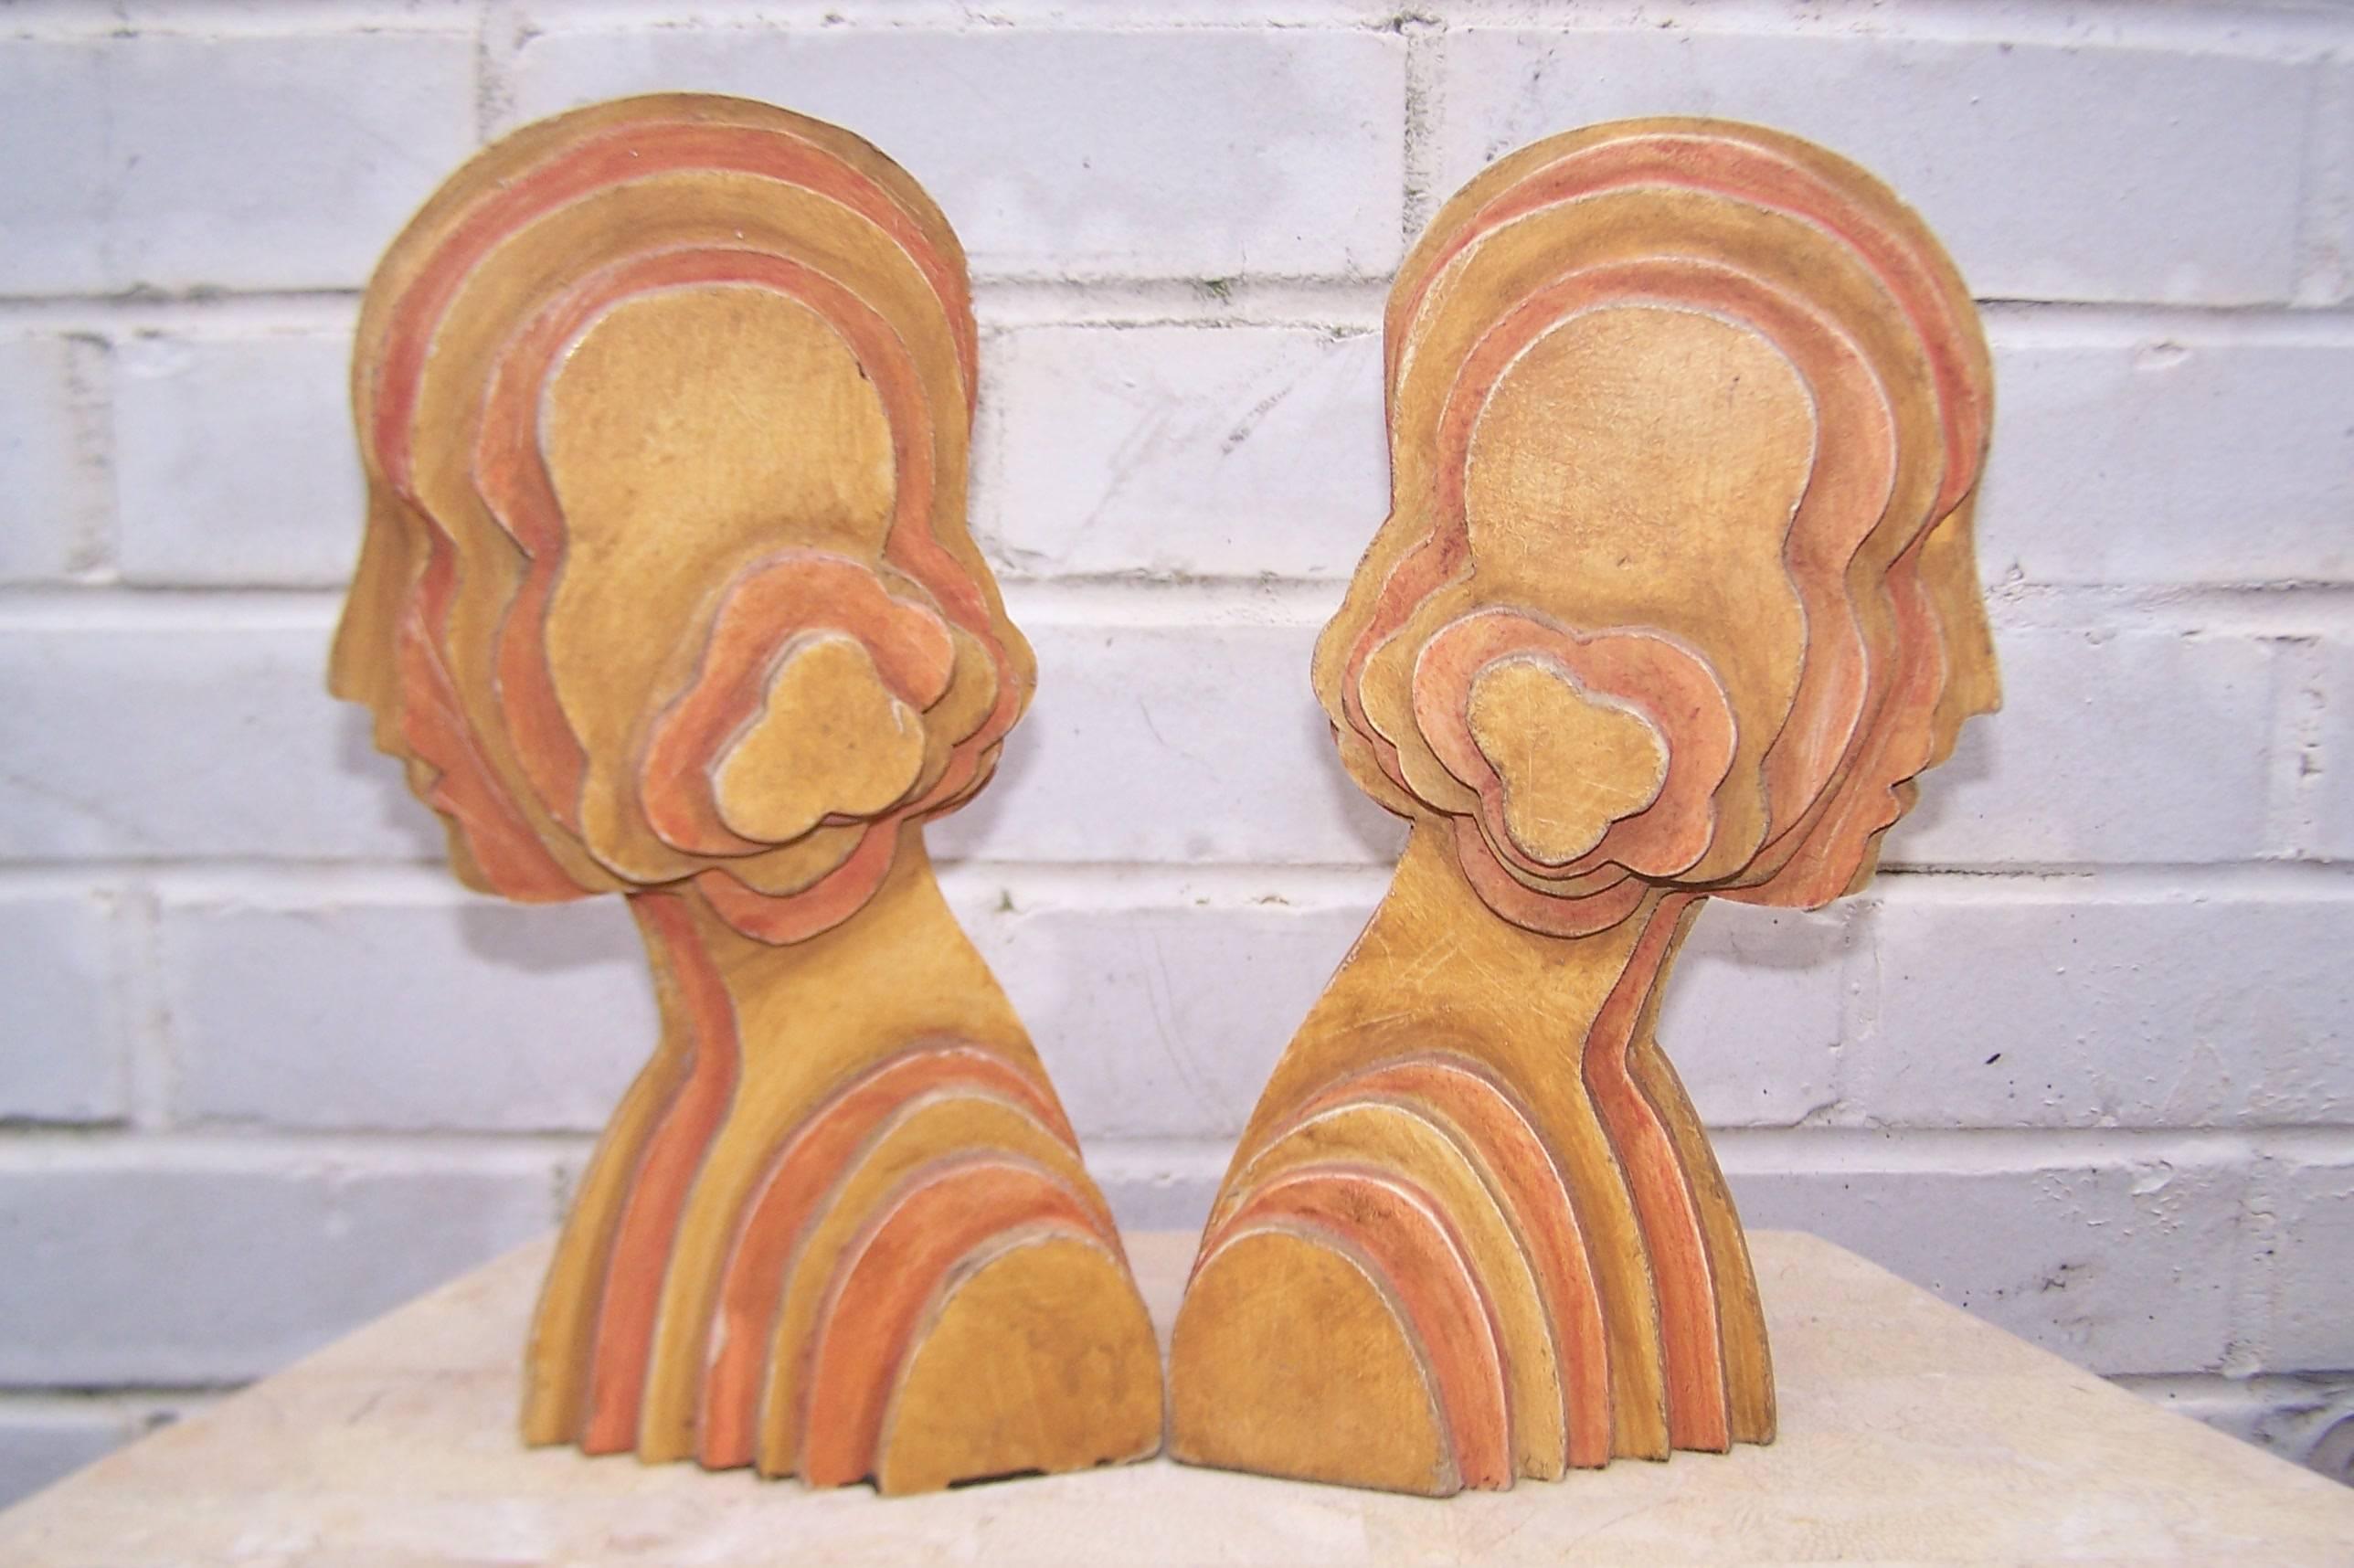 Bookends or sculptures? Why not both? All your bases are covered with these C.1970 art deco inspired flapper bookends created from layered wood pieces. Muted orange and yellow colors finish off the mod 70s vibe for a unique addition to your